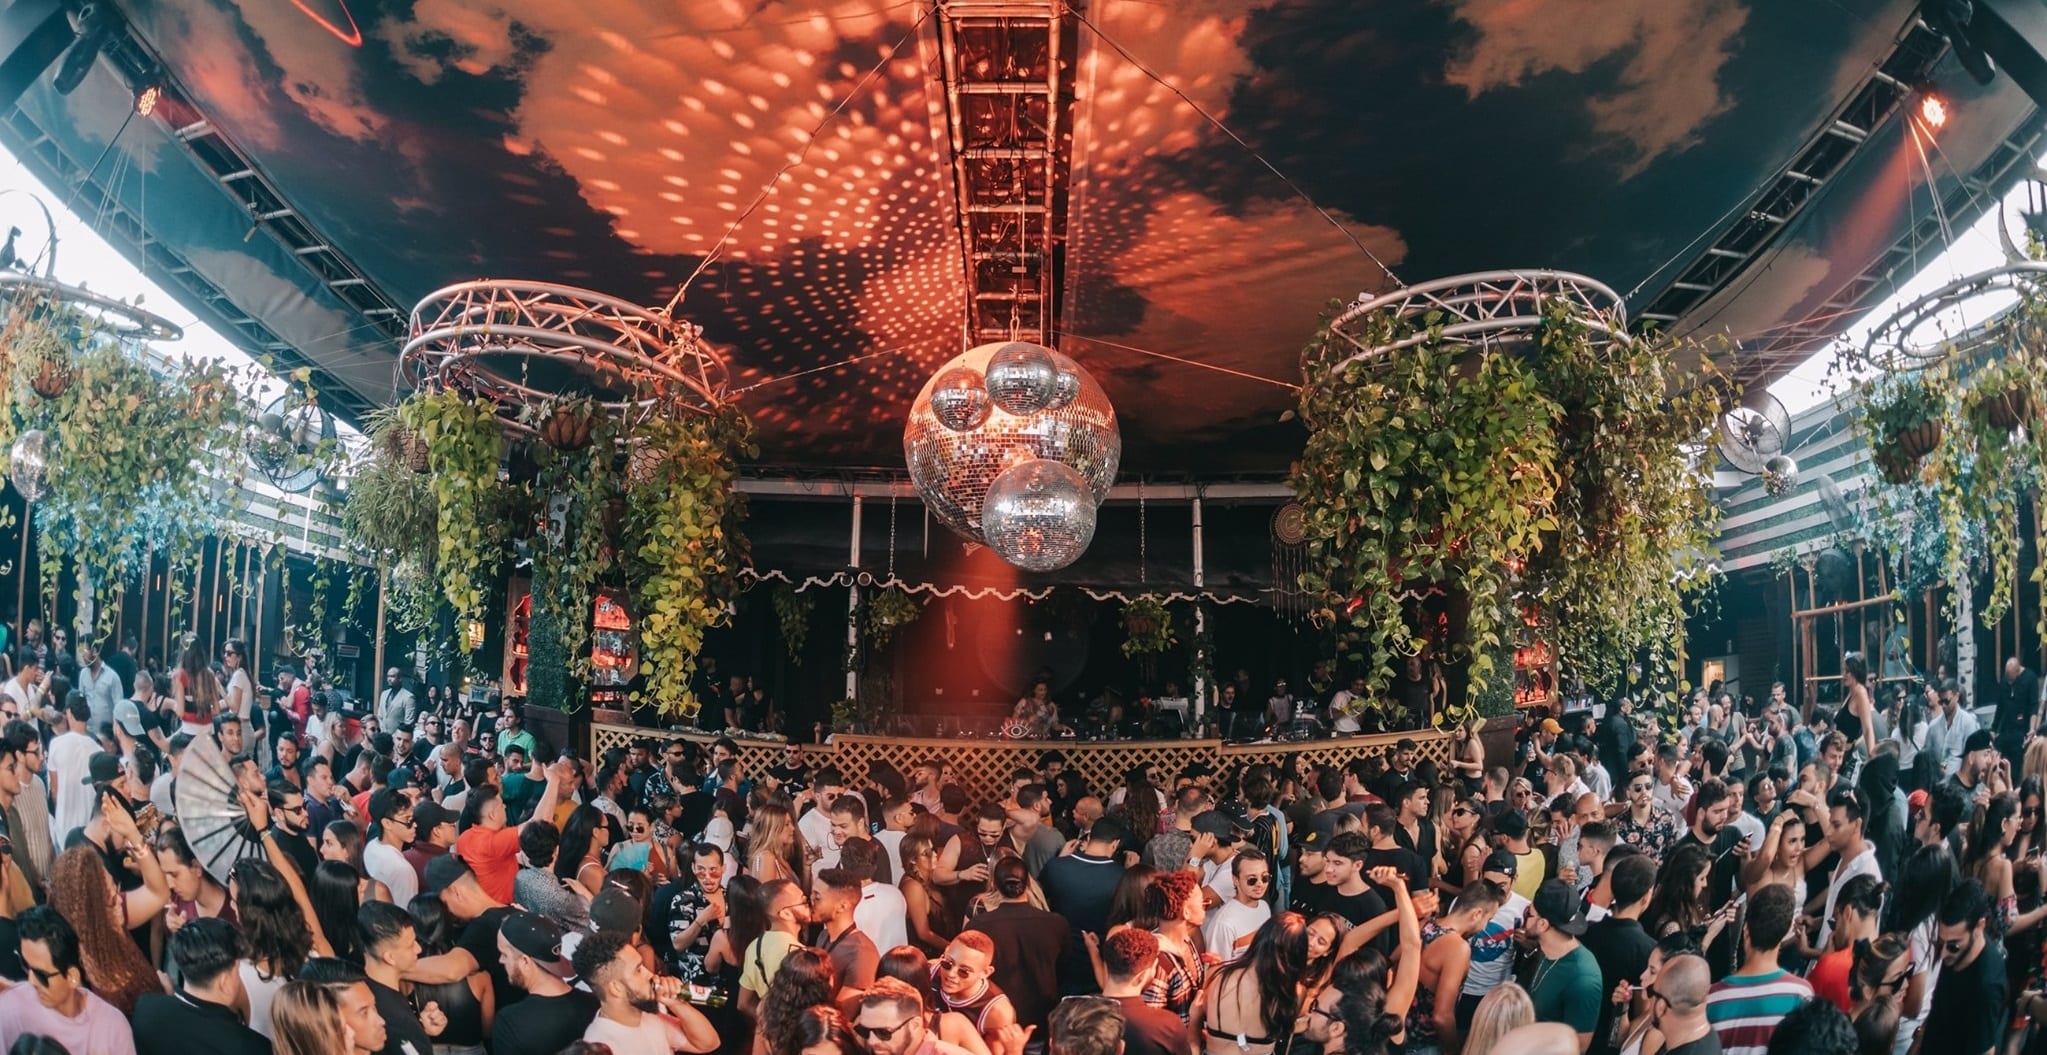 Miami’s Club Space Will Reopen With Strict COVID19 Restrictions